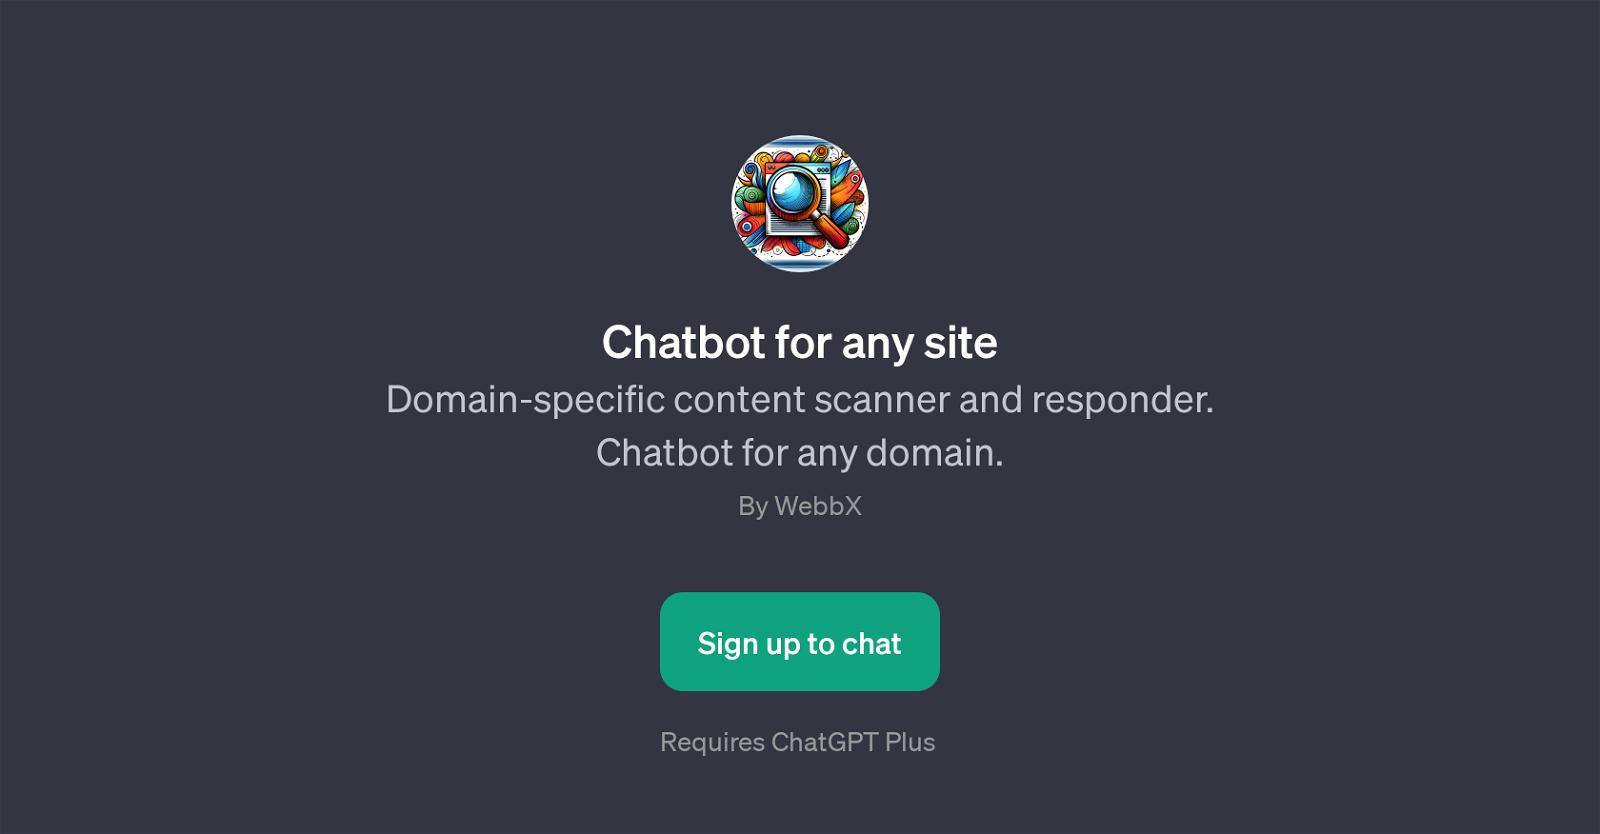 Chatbot for any site website